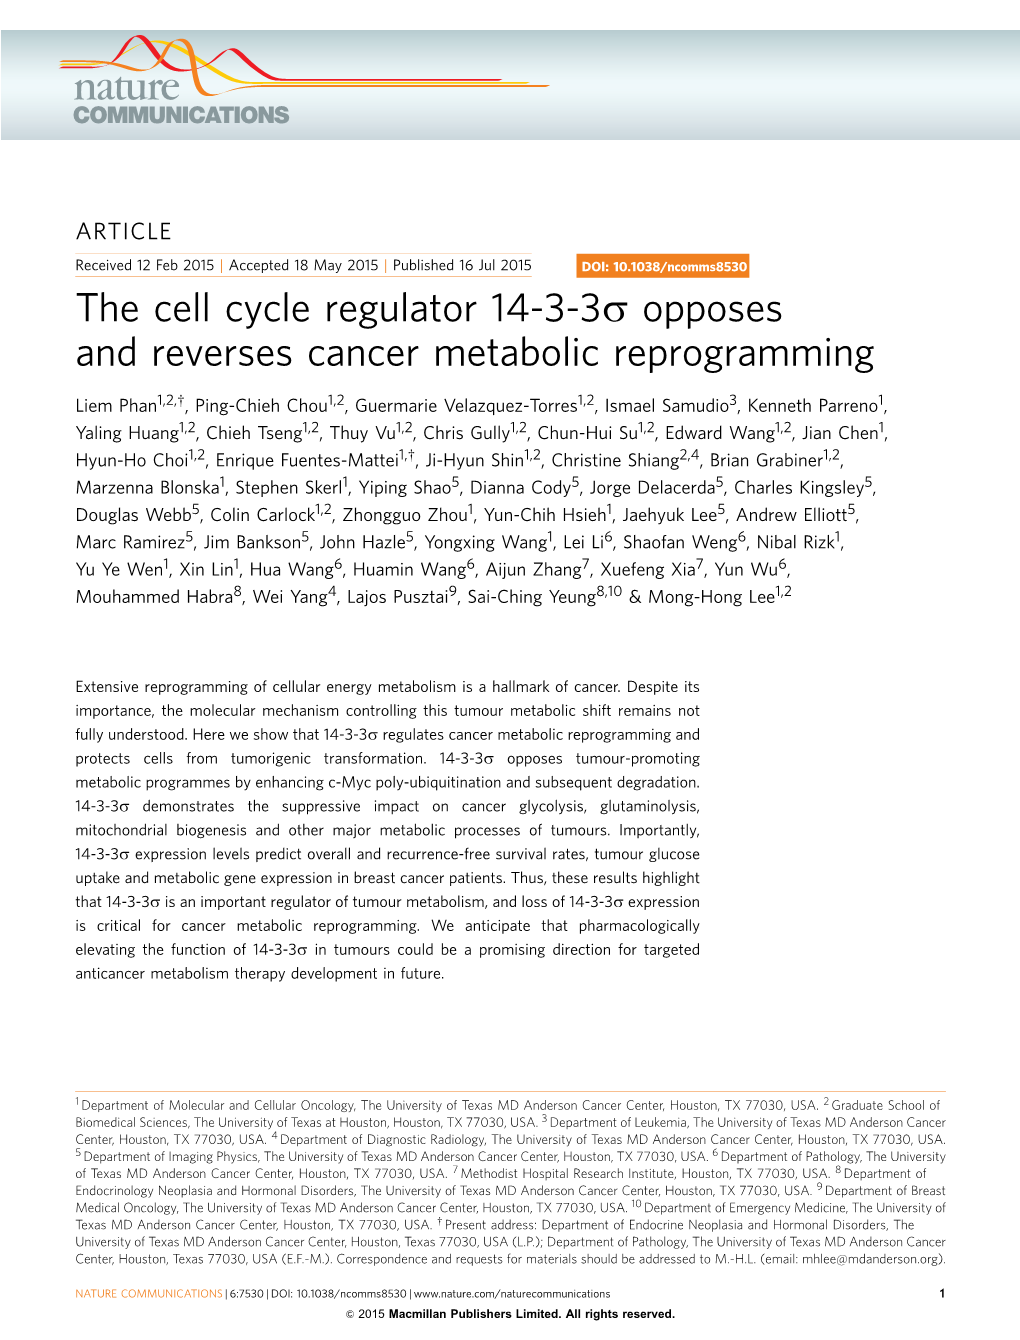 Opposes and Reverses Cancer Metabolic Reprogramming